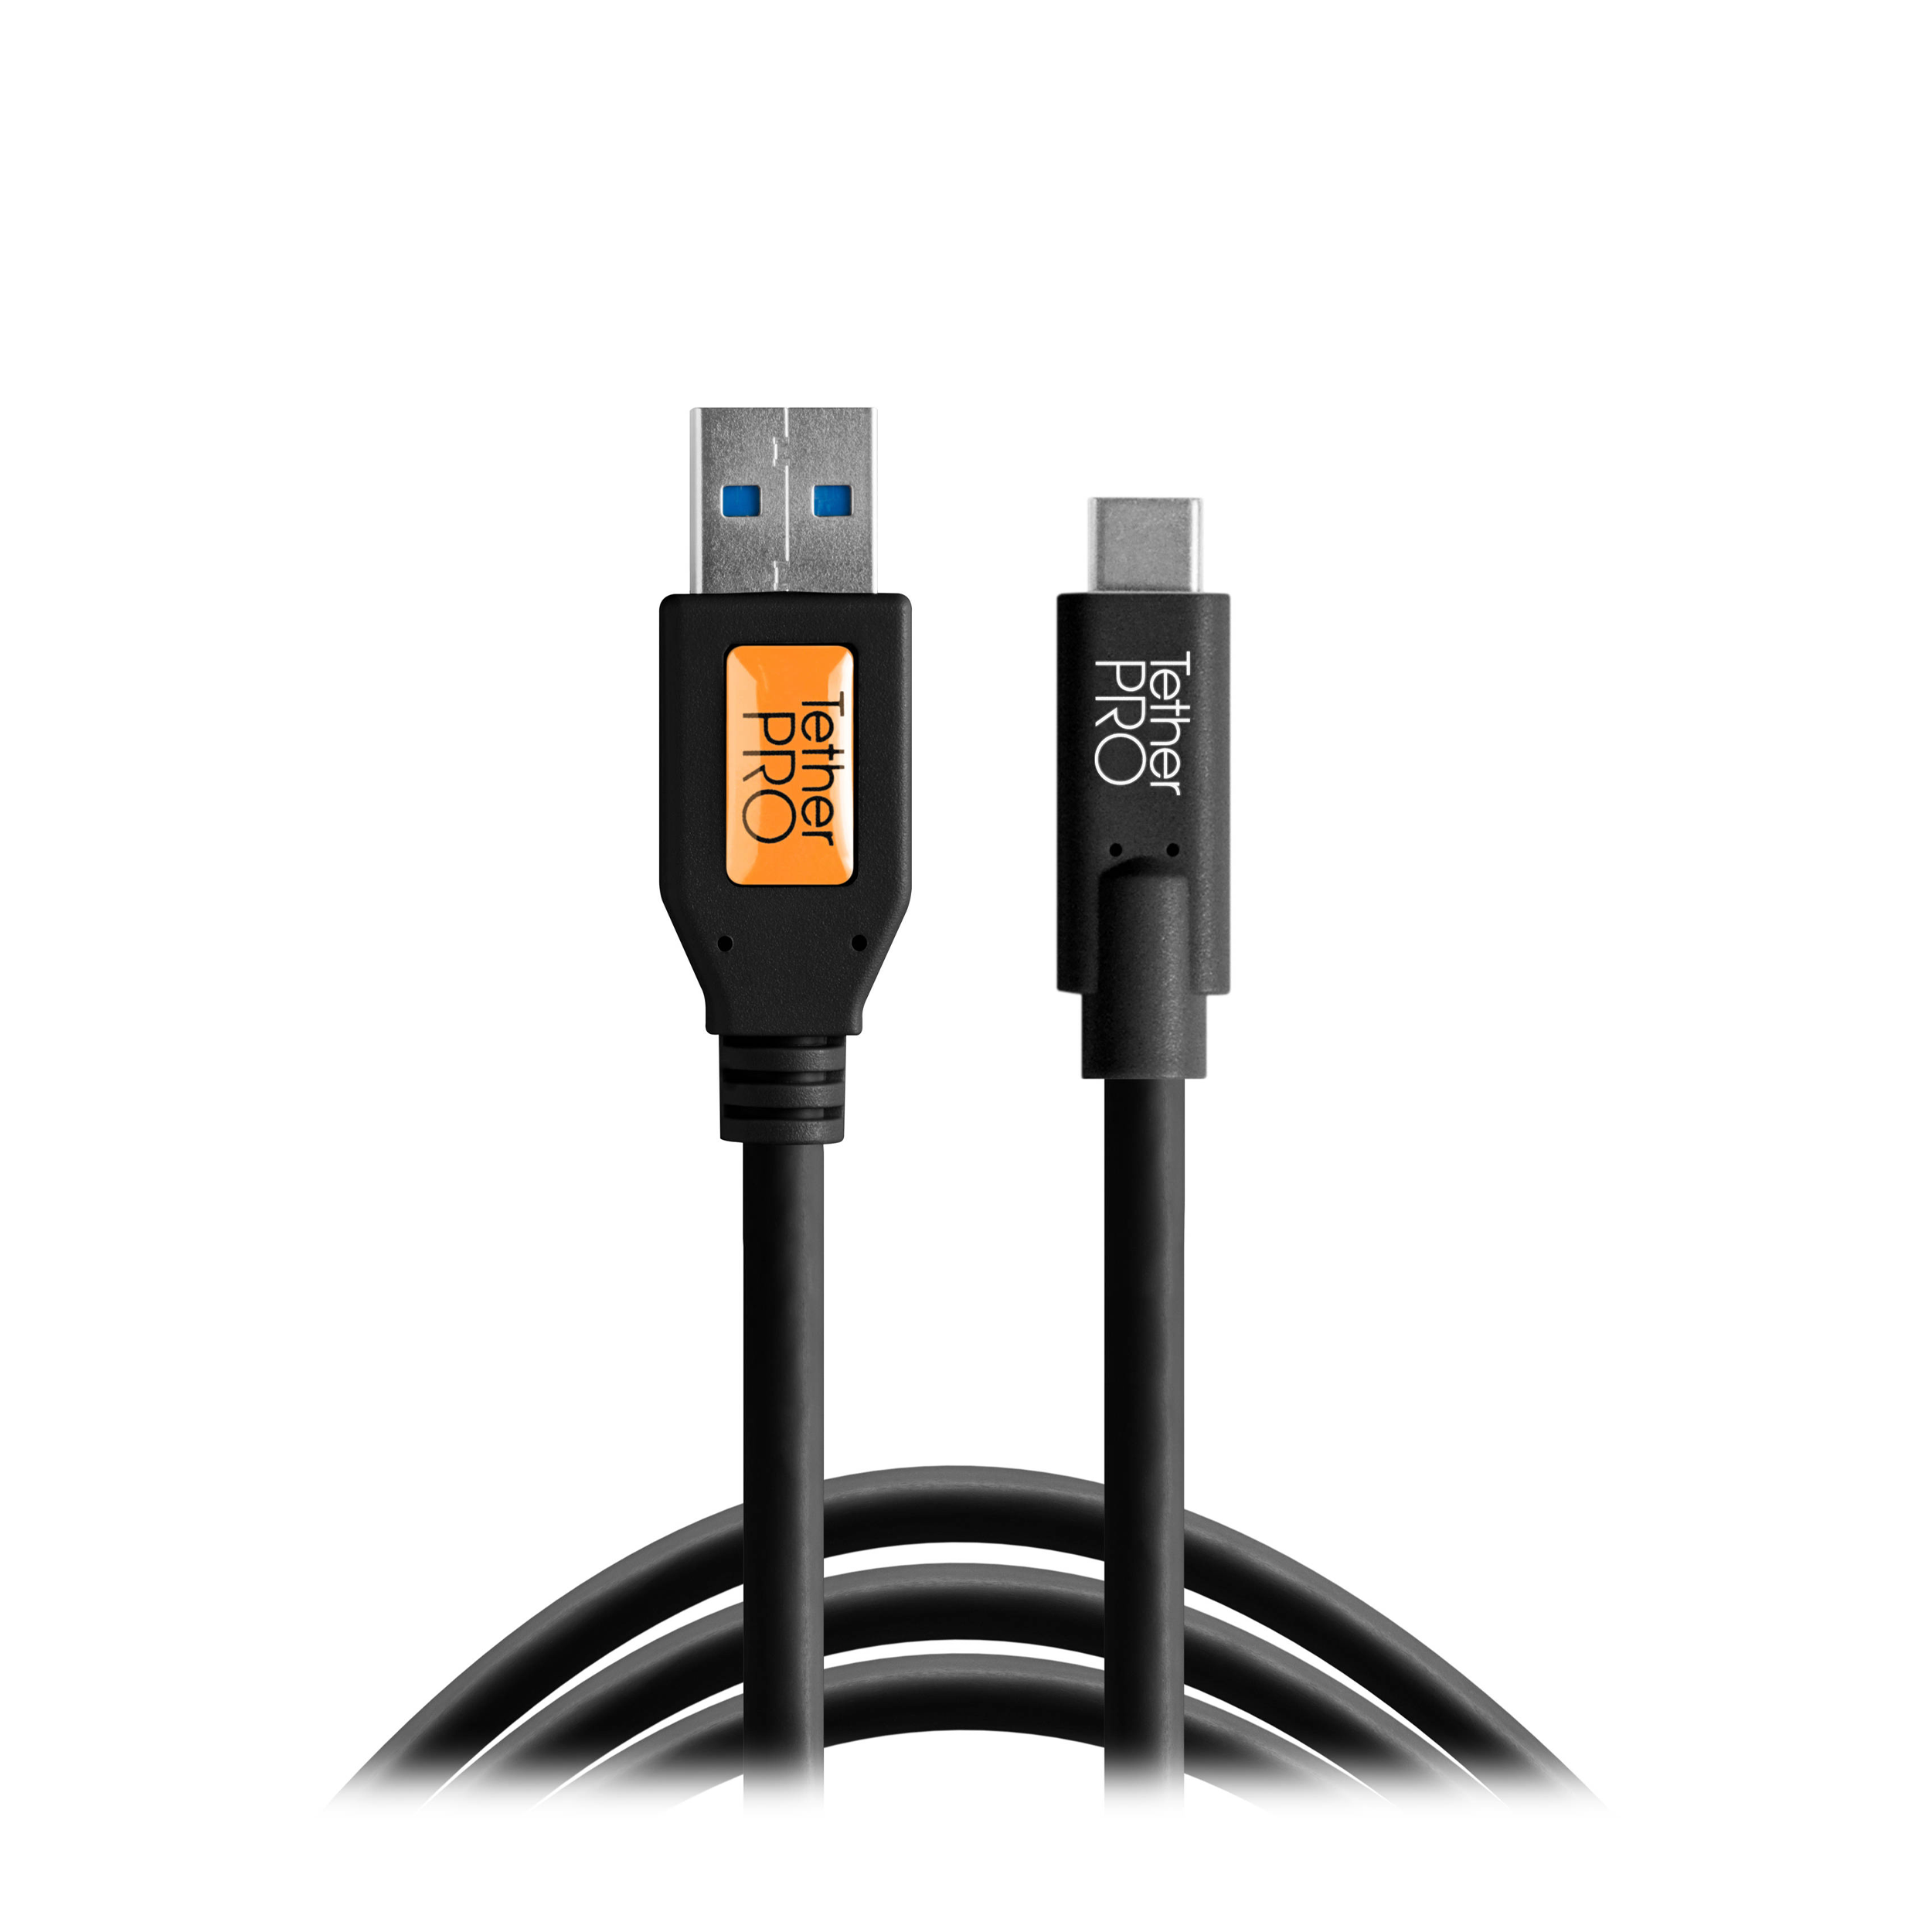 Tether Tools TetherPro USB Type-C Male to USB 3.0 Type-A Male Cable - 15', Black